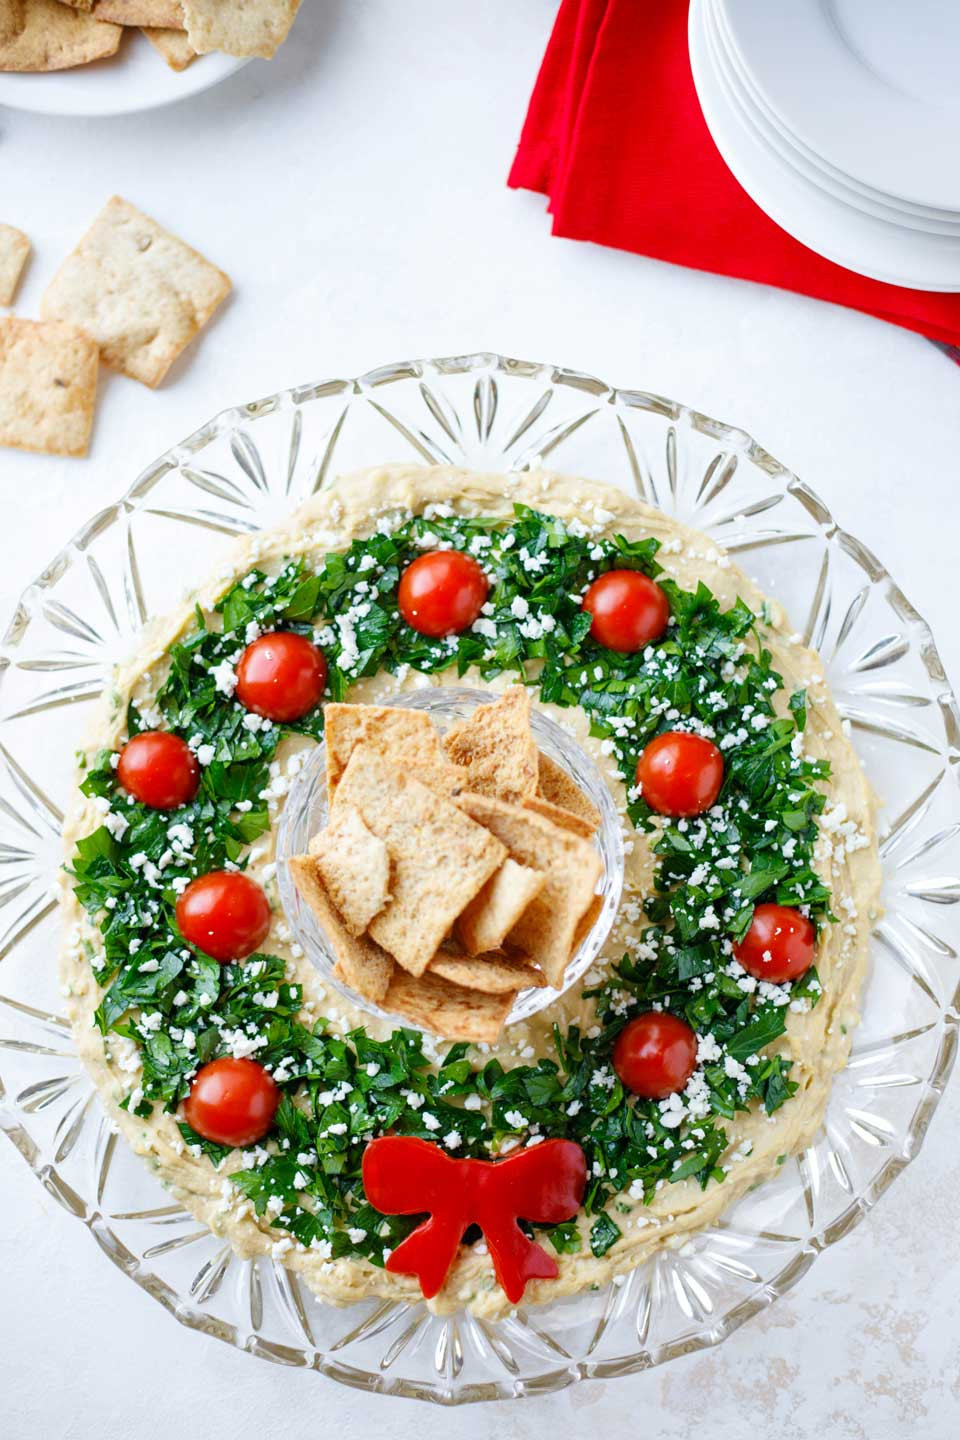 Healthy Christmas Appetizers For Parties
 Easy Christmas Appetizer "Hummus Wreath" Two Healthy